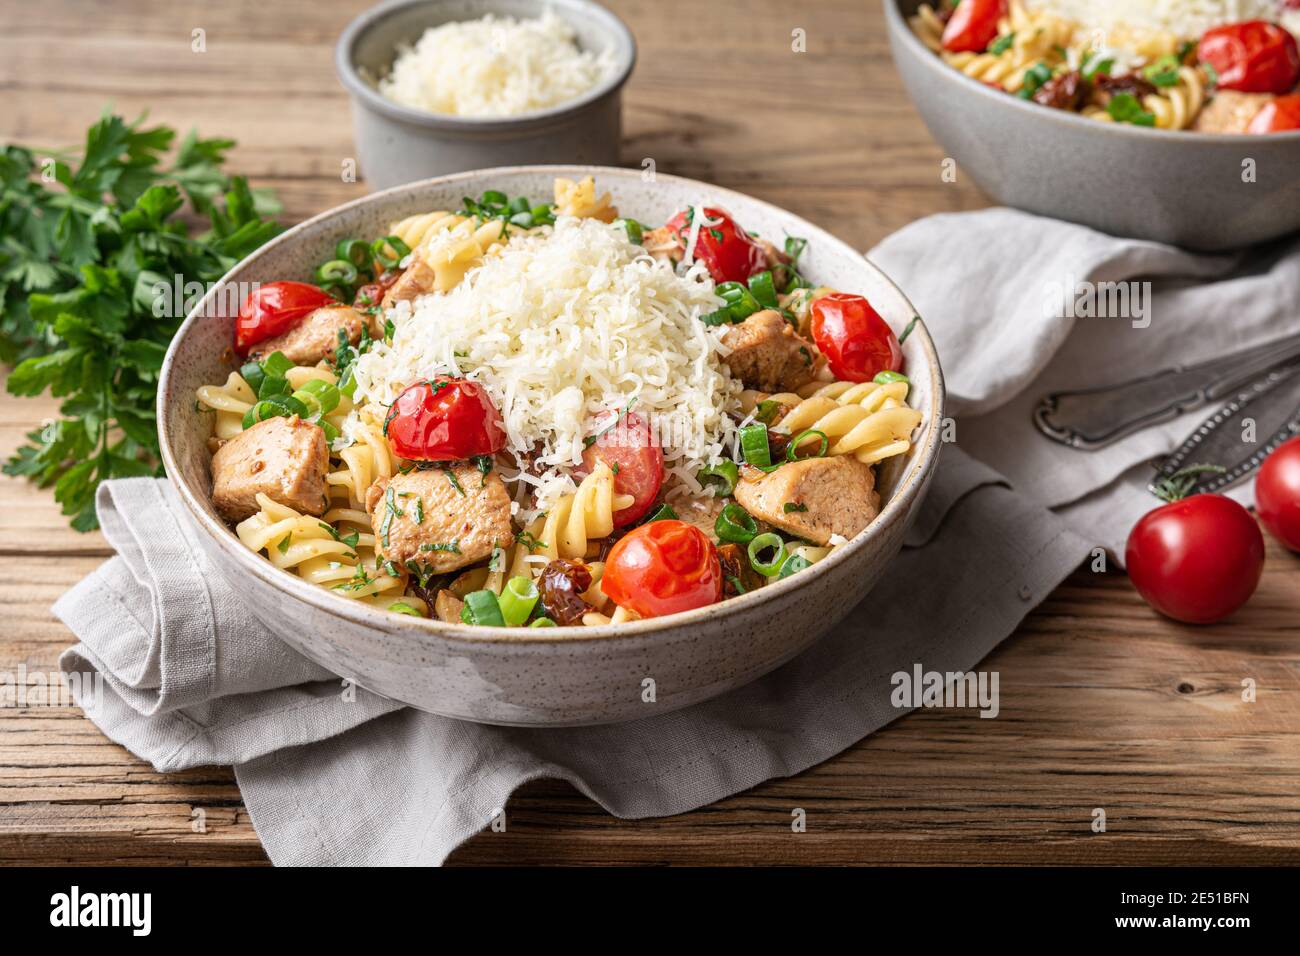 Chicken pasta salad with roasted and sun-dried tomatoes, topped with green onion slices and grated cheese on wooden background Stock Photo